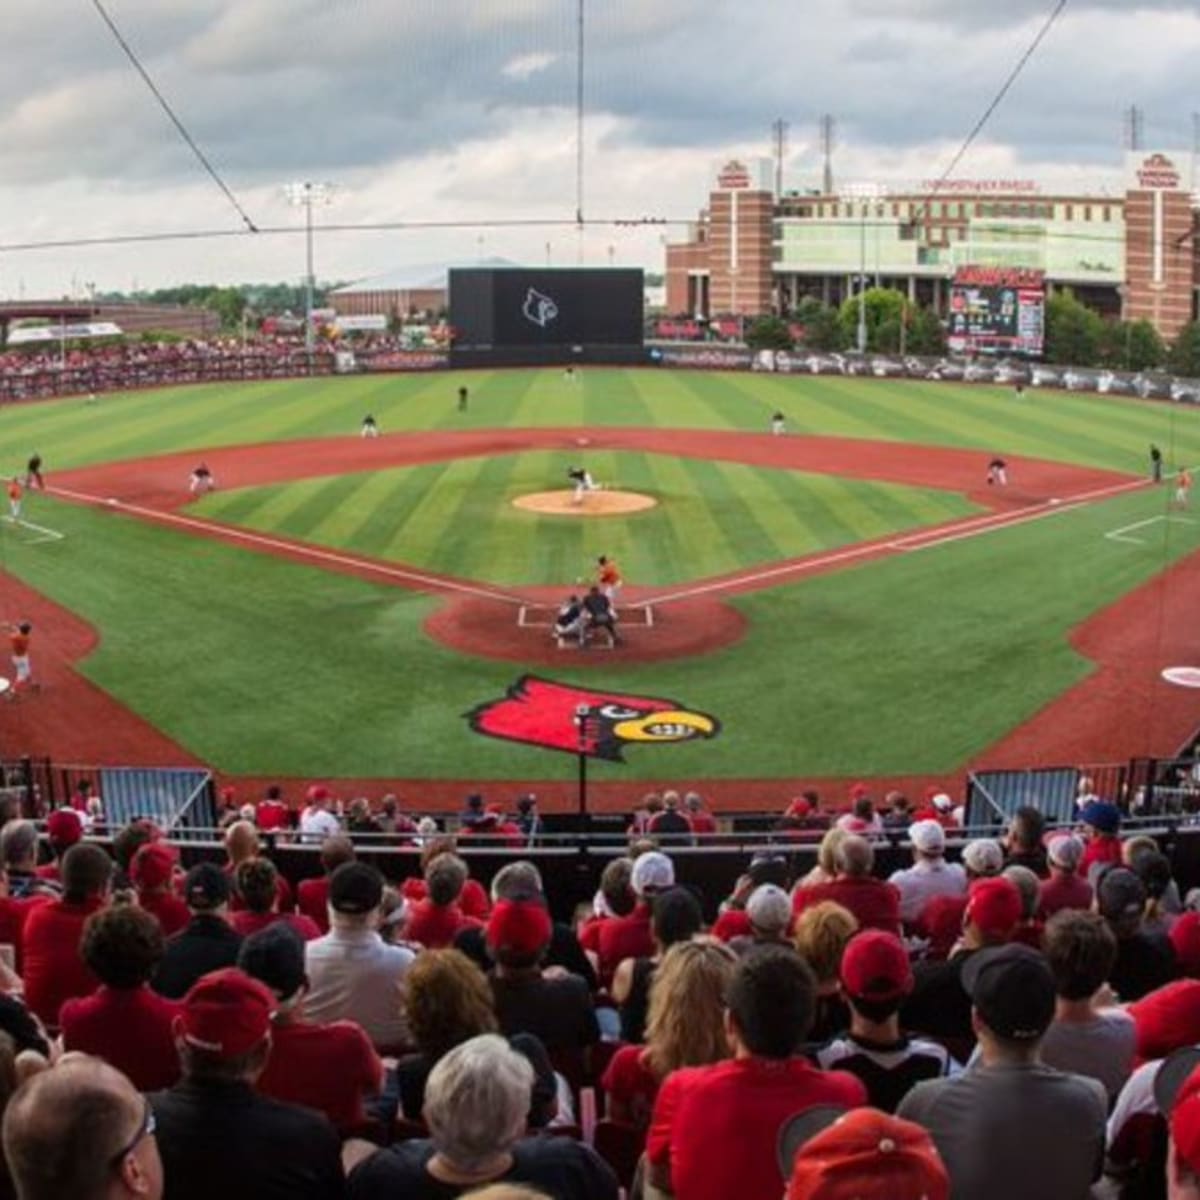 U of L baseball wins fourth game in a row – The Louisville Cardinal